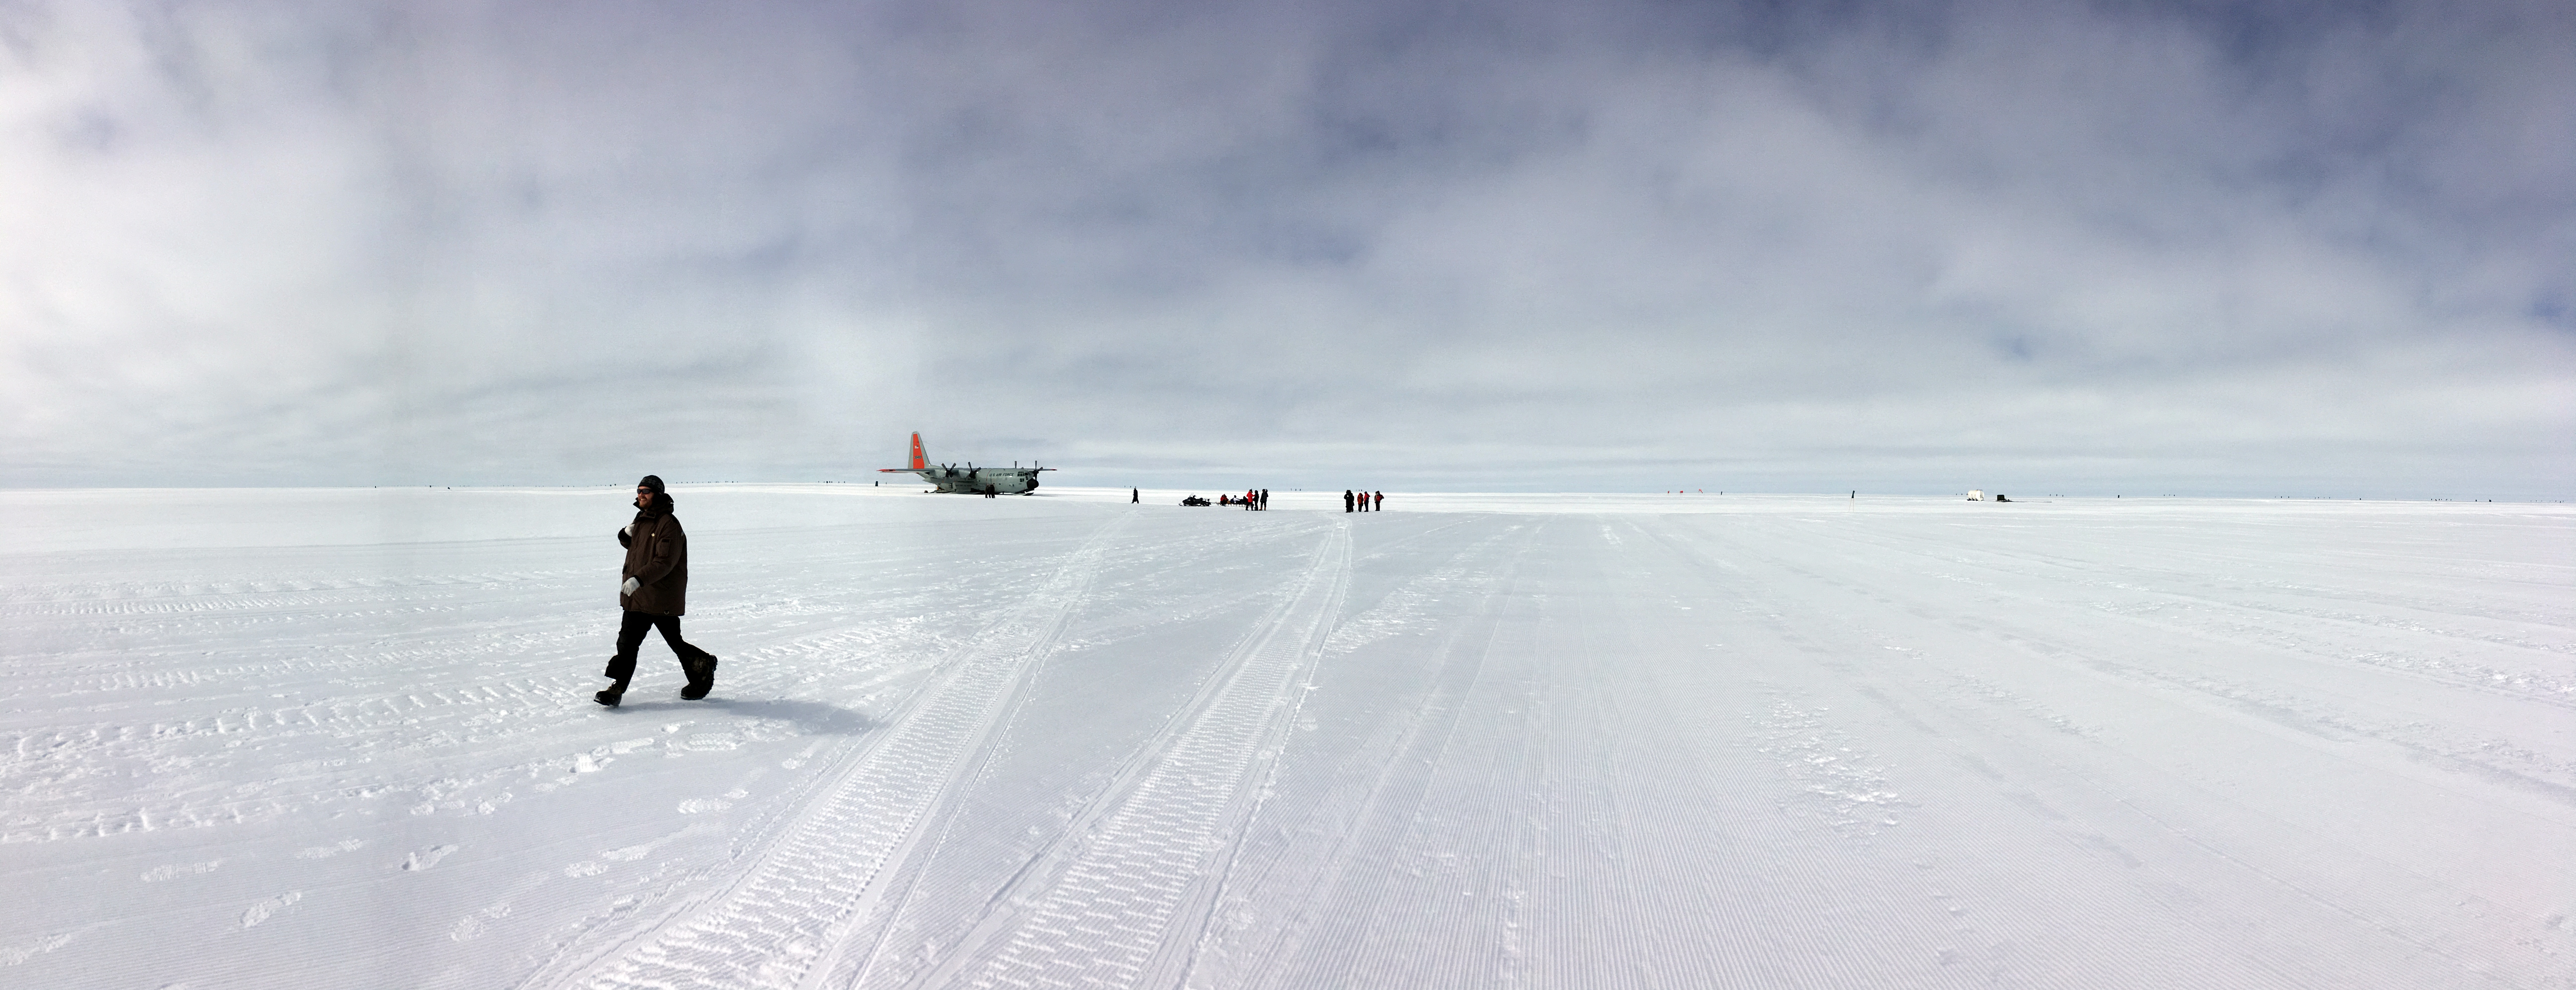 New people arriving into camp - the LC-130 is parked on the skiway.